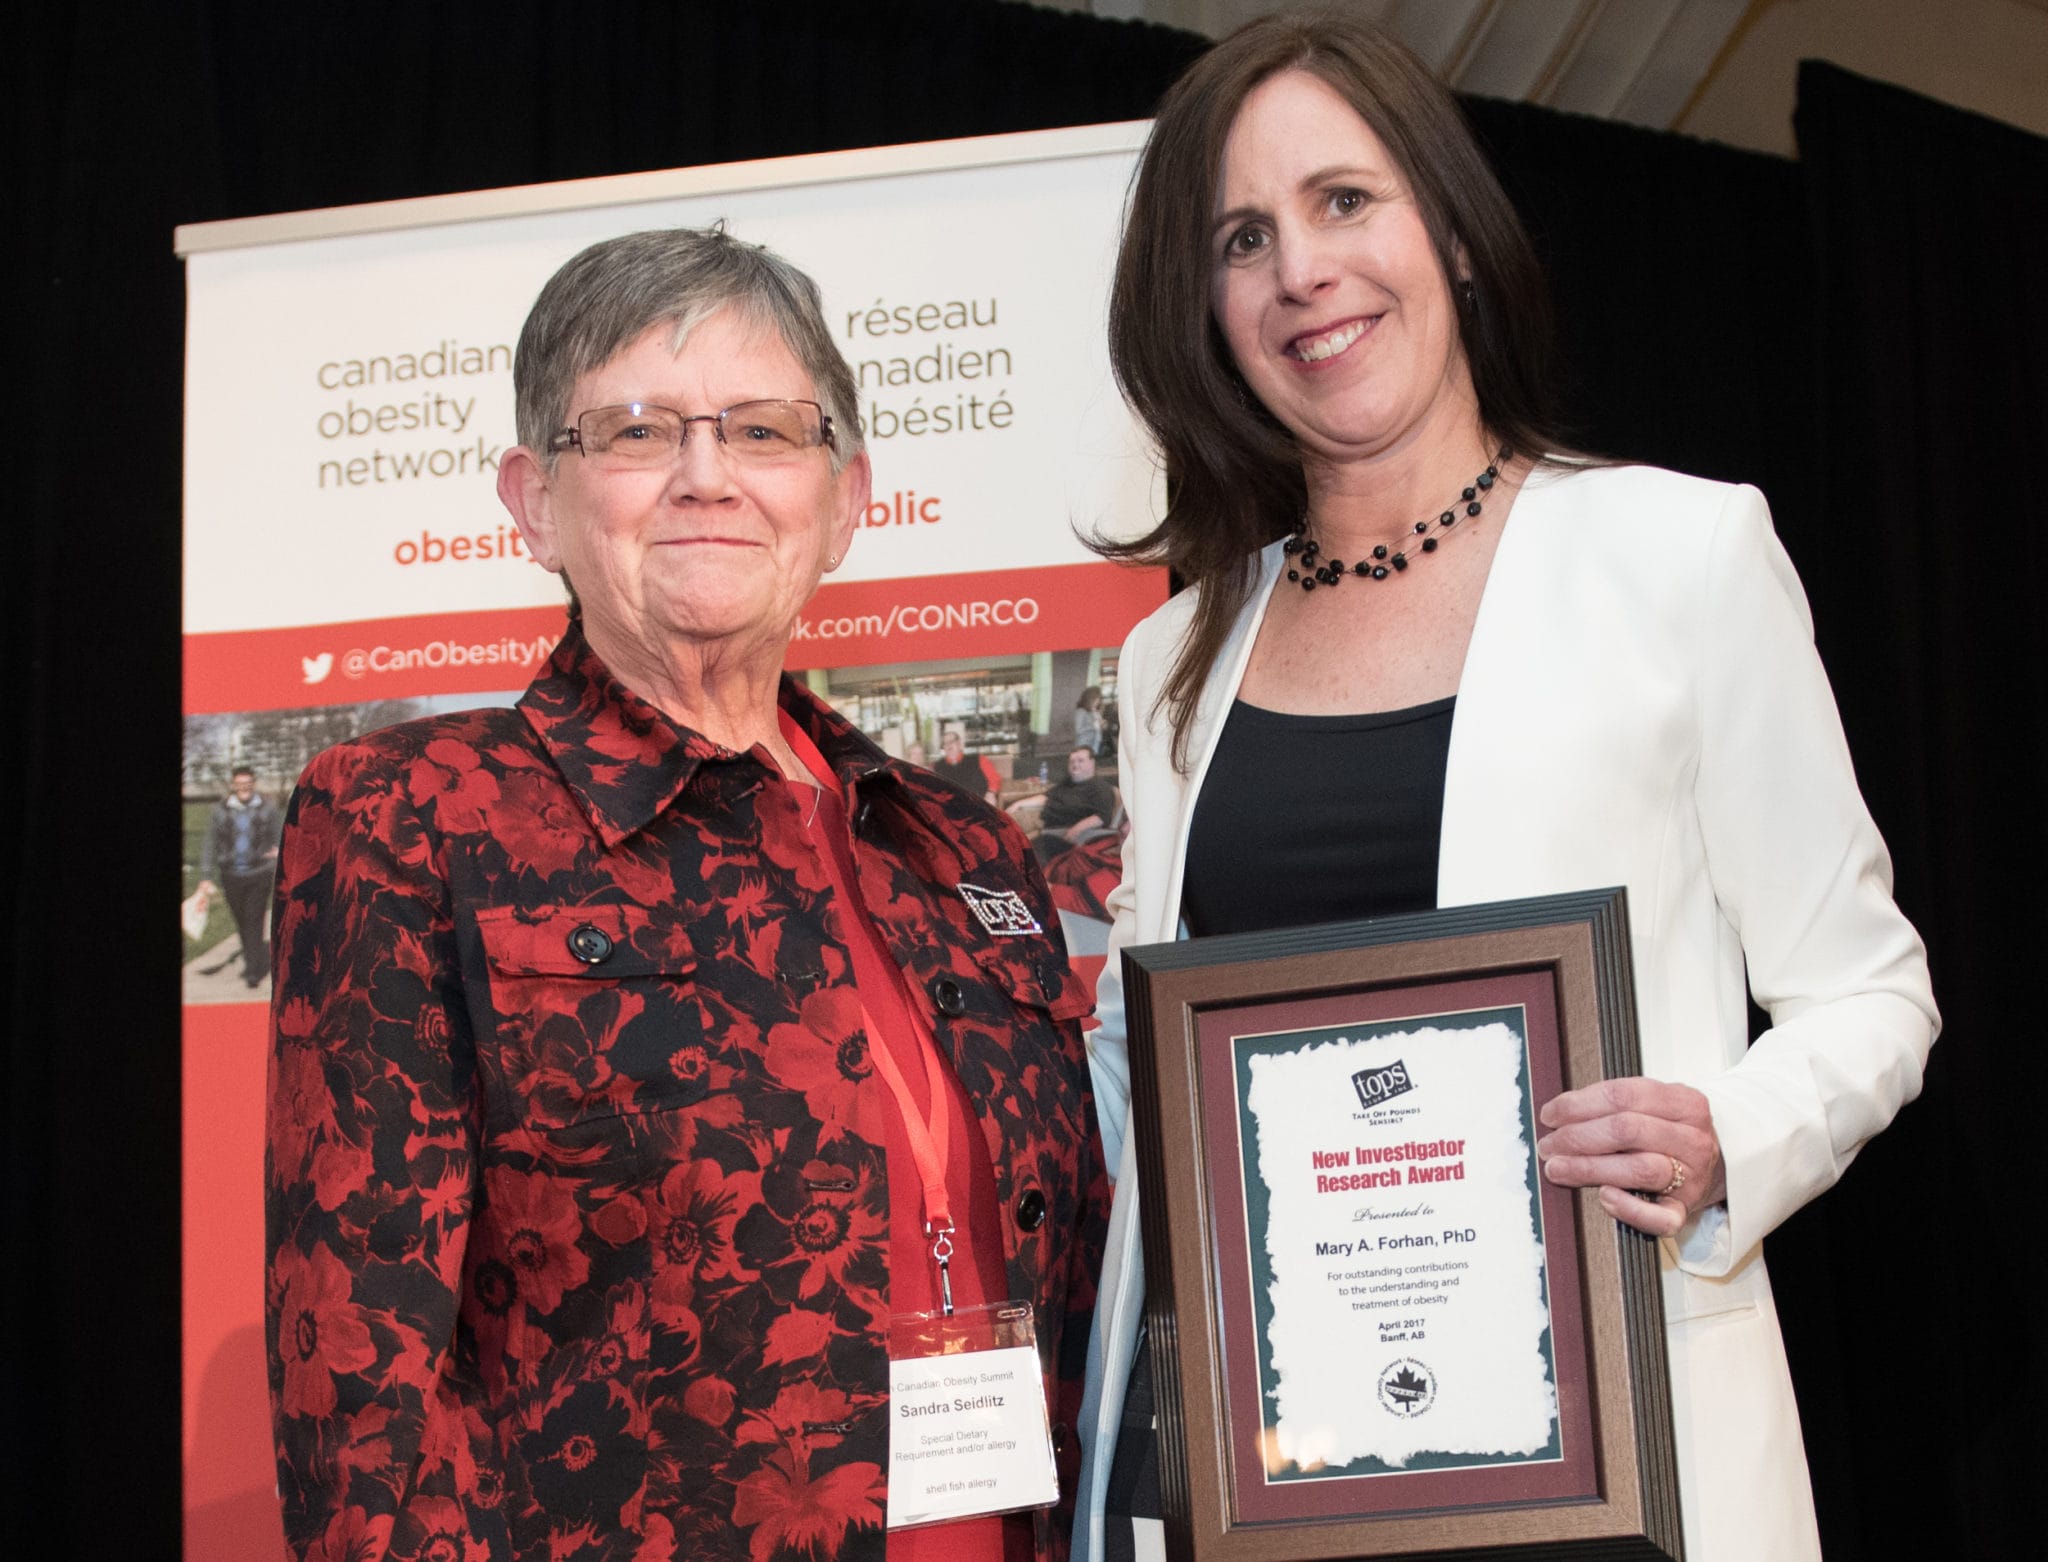 Two women posing with an award certificate at a canadian obesity network event.